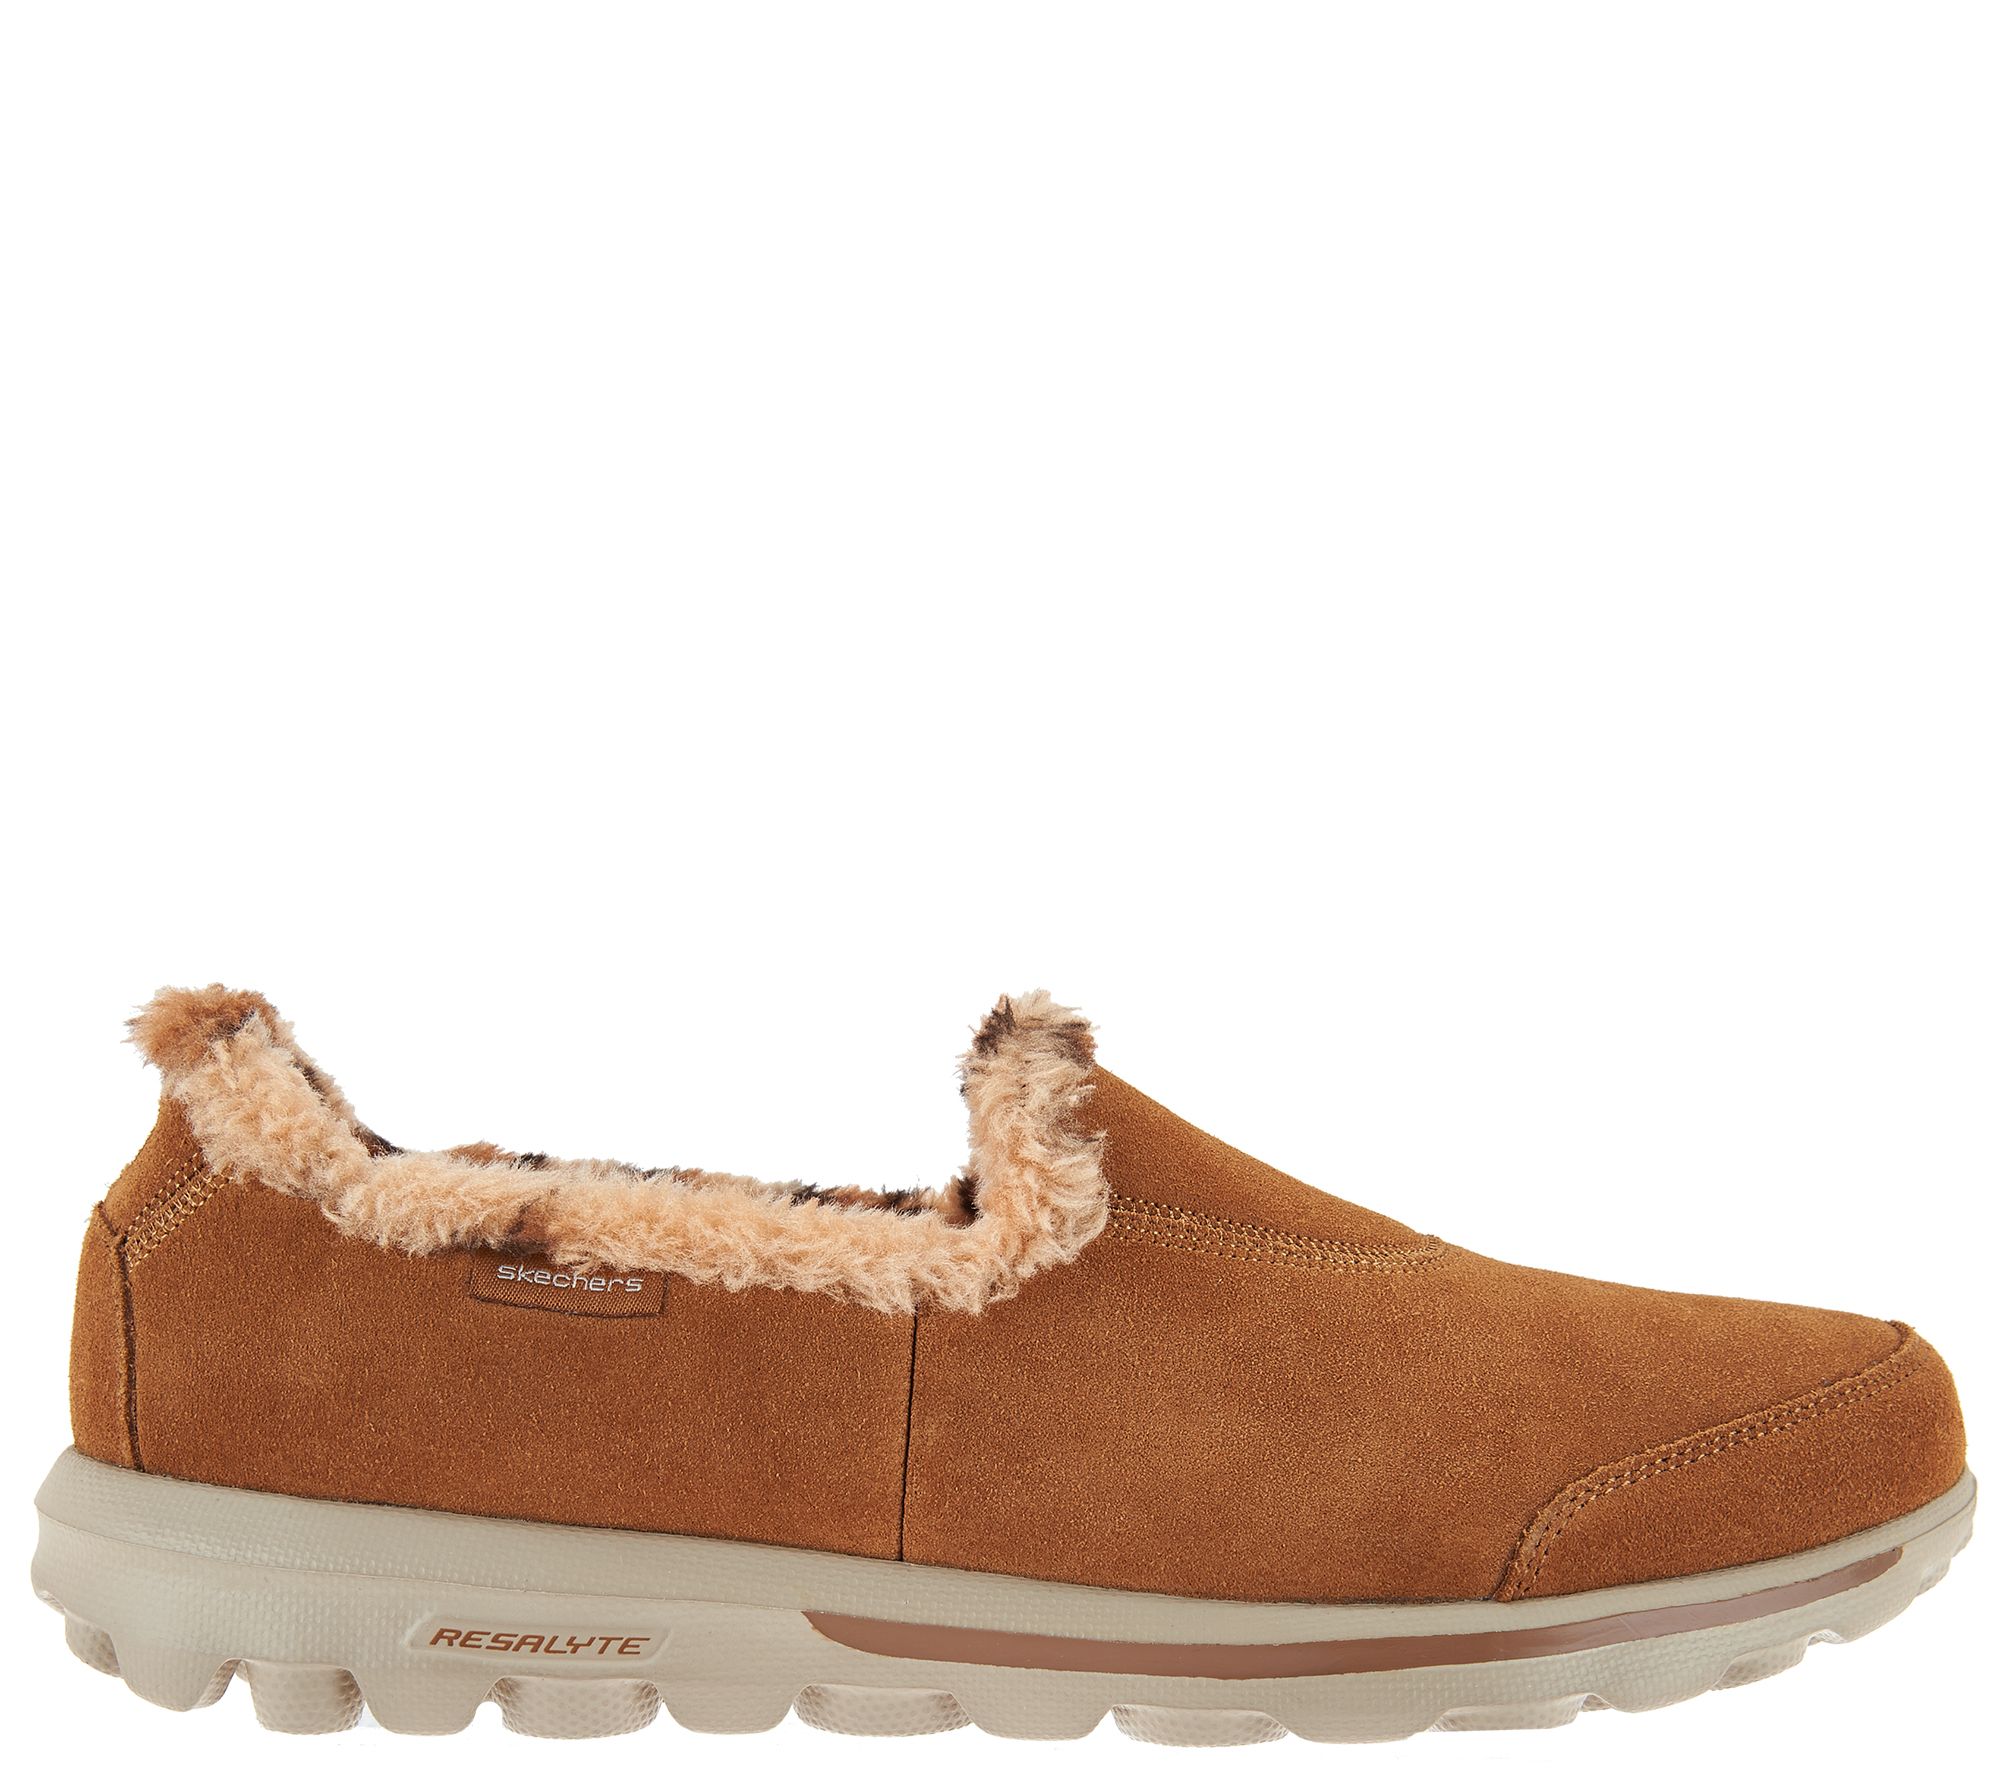 skechers go walk suede slip on shoes with faux fur